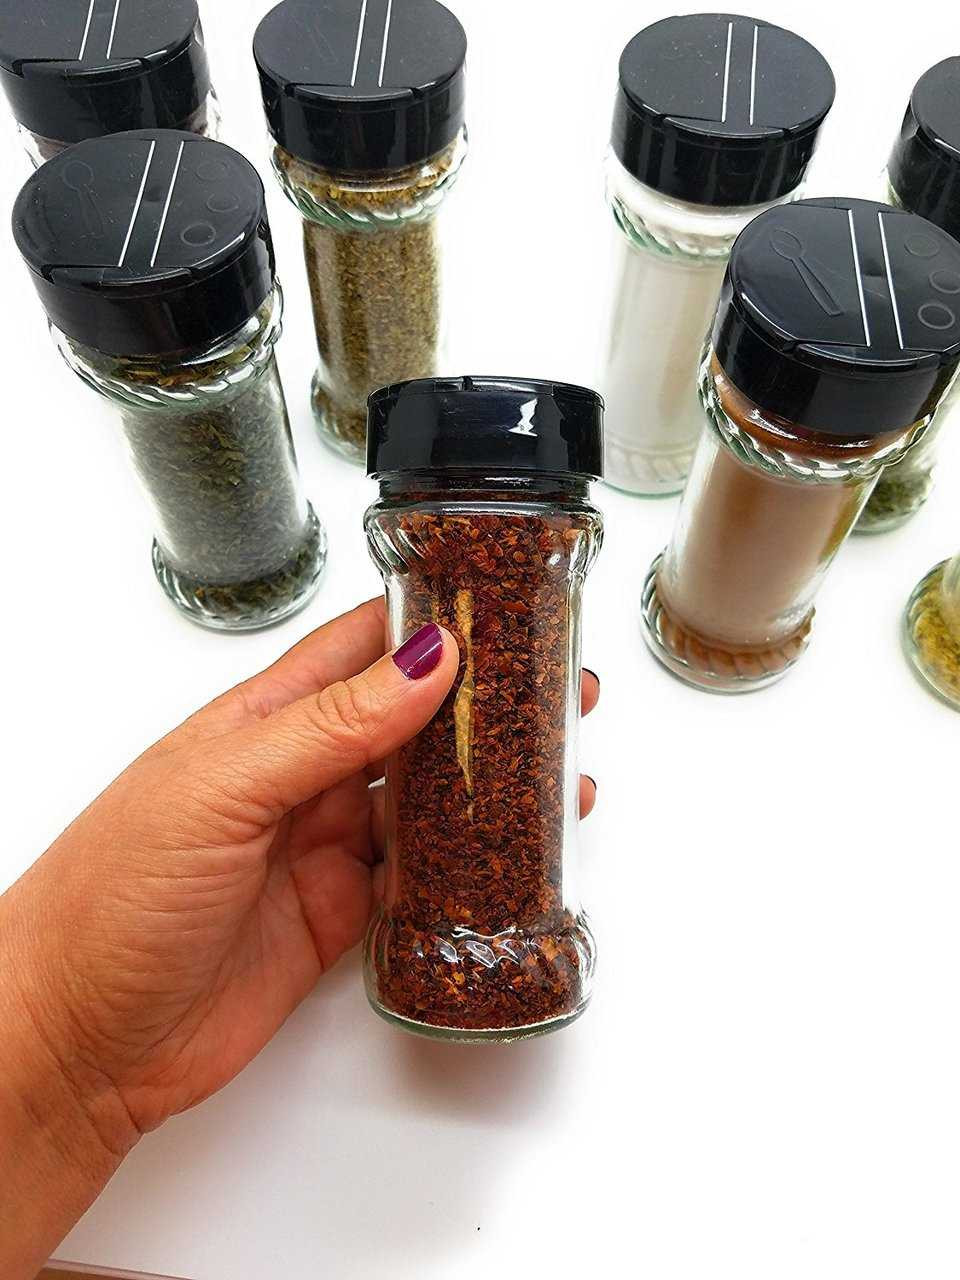 https://cdn11.bigcommerce.com/s-1ybtx/images/stencil/1280x1280/products/846/6055/Set-of-8-64-oz-Glass-Spice-Jars-with-Shaker-Fitment-and-Black-Caps_2627__61696.1674334392.jpg?c=2?imbypass=on